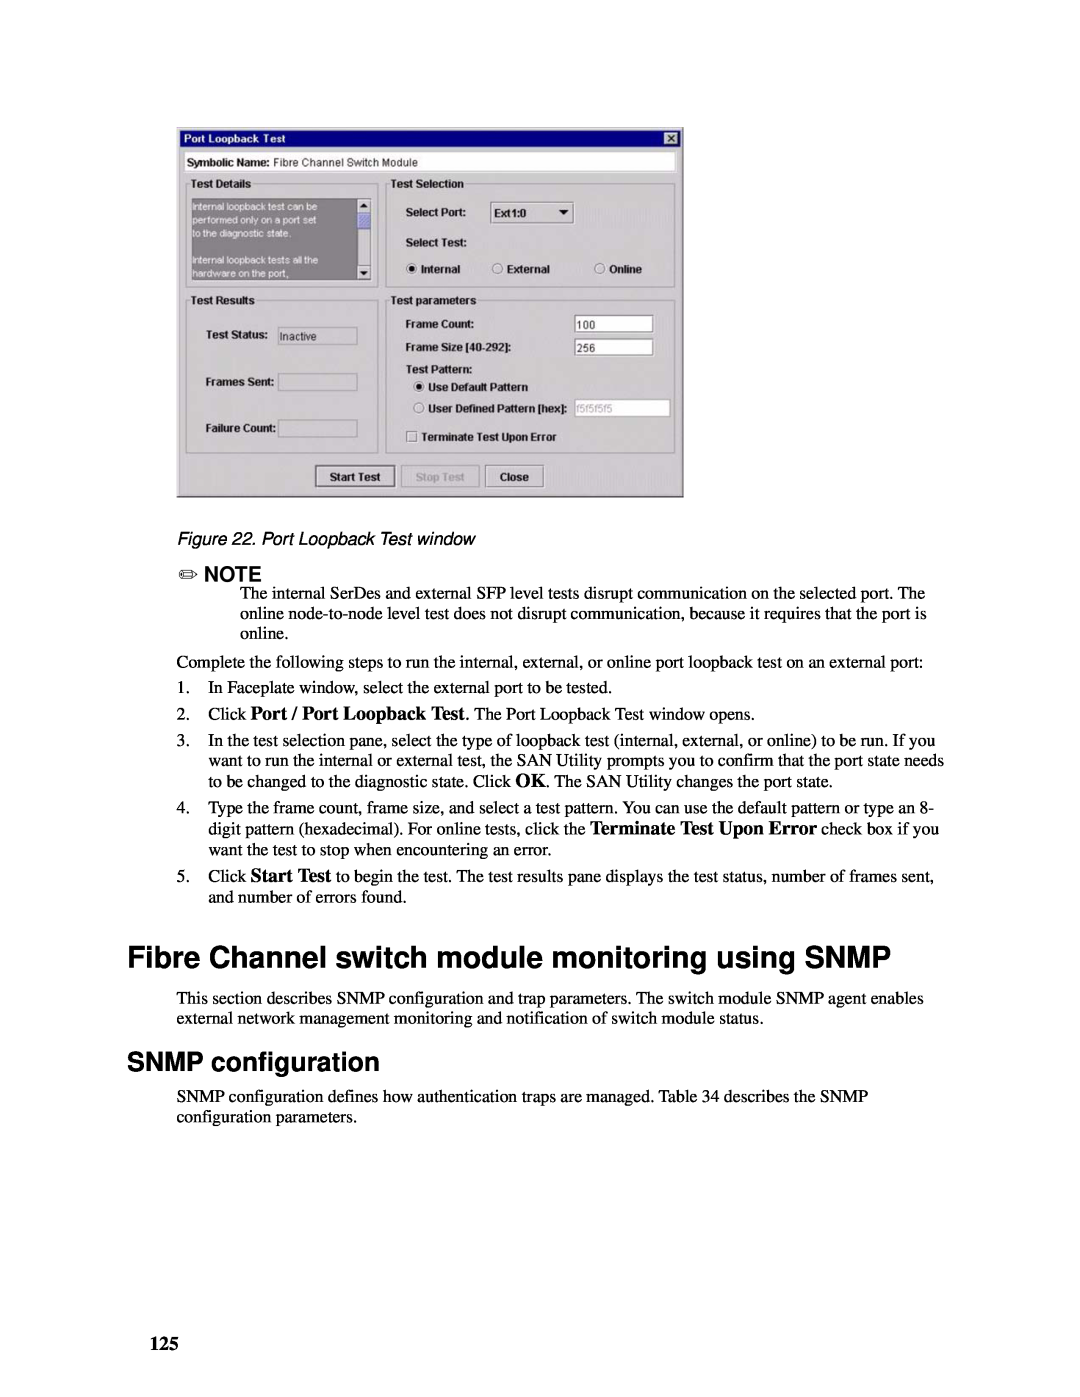 Intel SBCEFCSW manual Fibre Channel switch module monitoring using SNMP, SNMP configuration, Port Loopback Test window 